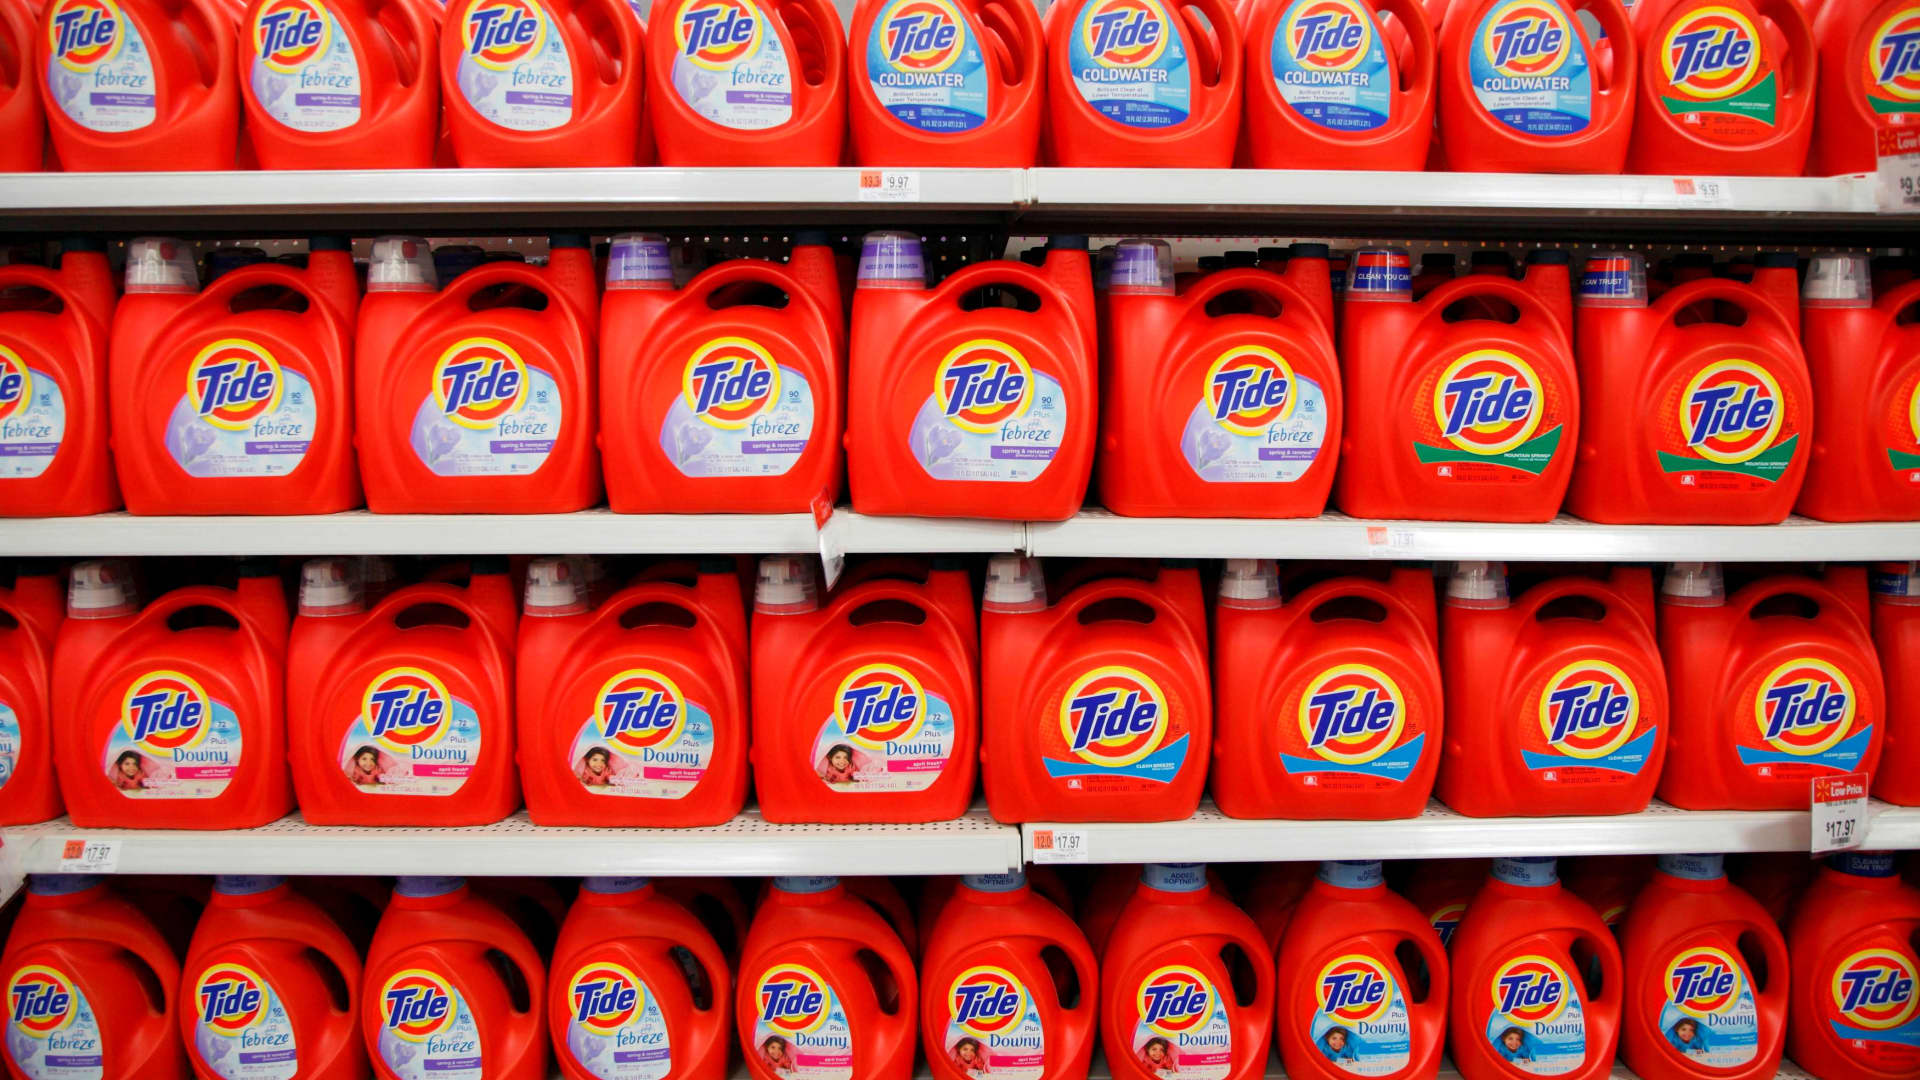 Procter & Gamble's Tide detergent can be seen on display at a new Wal-Mart store in Chicago January 24, 2012. 